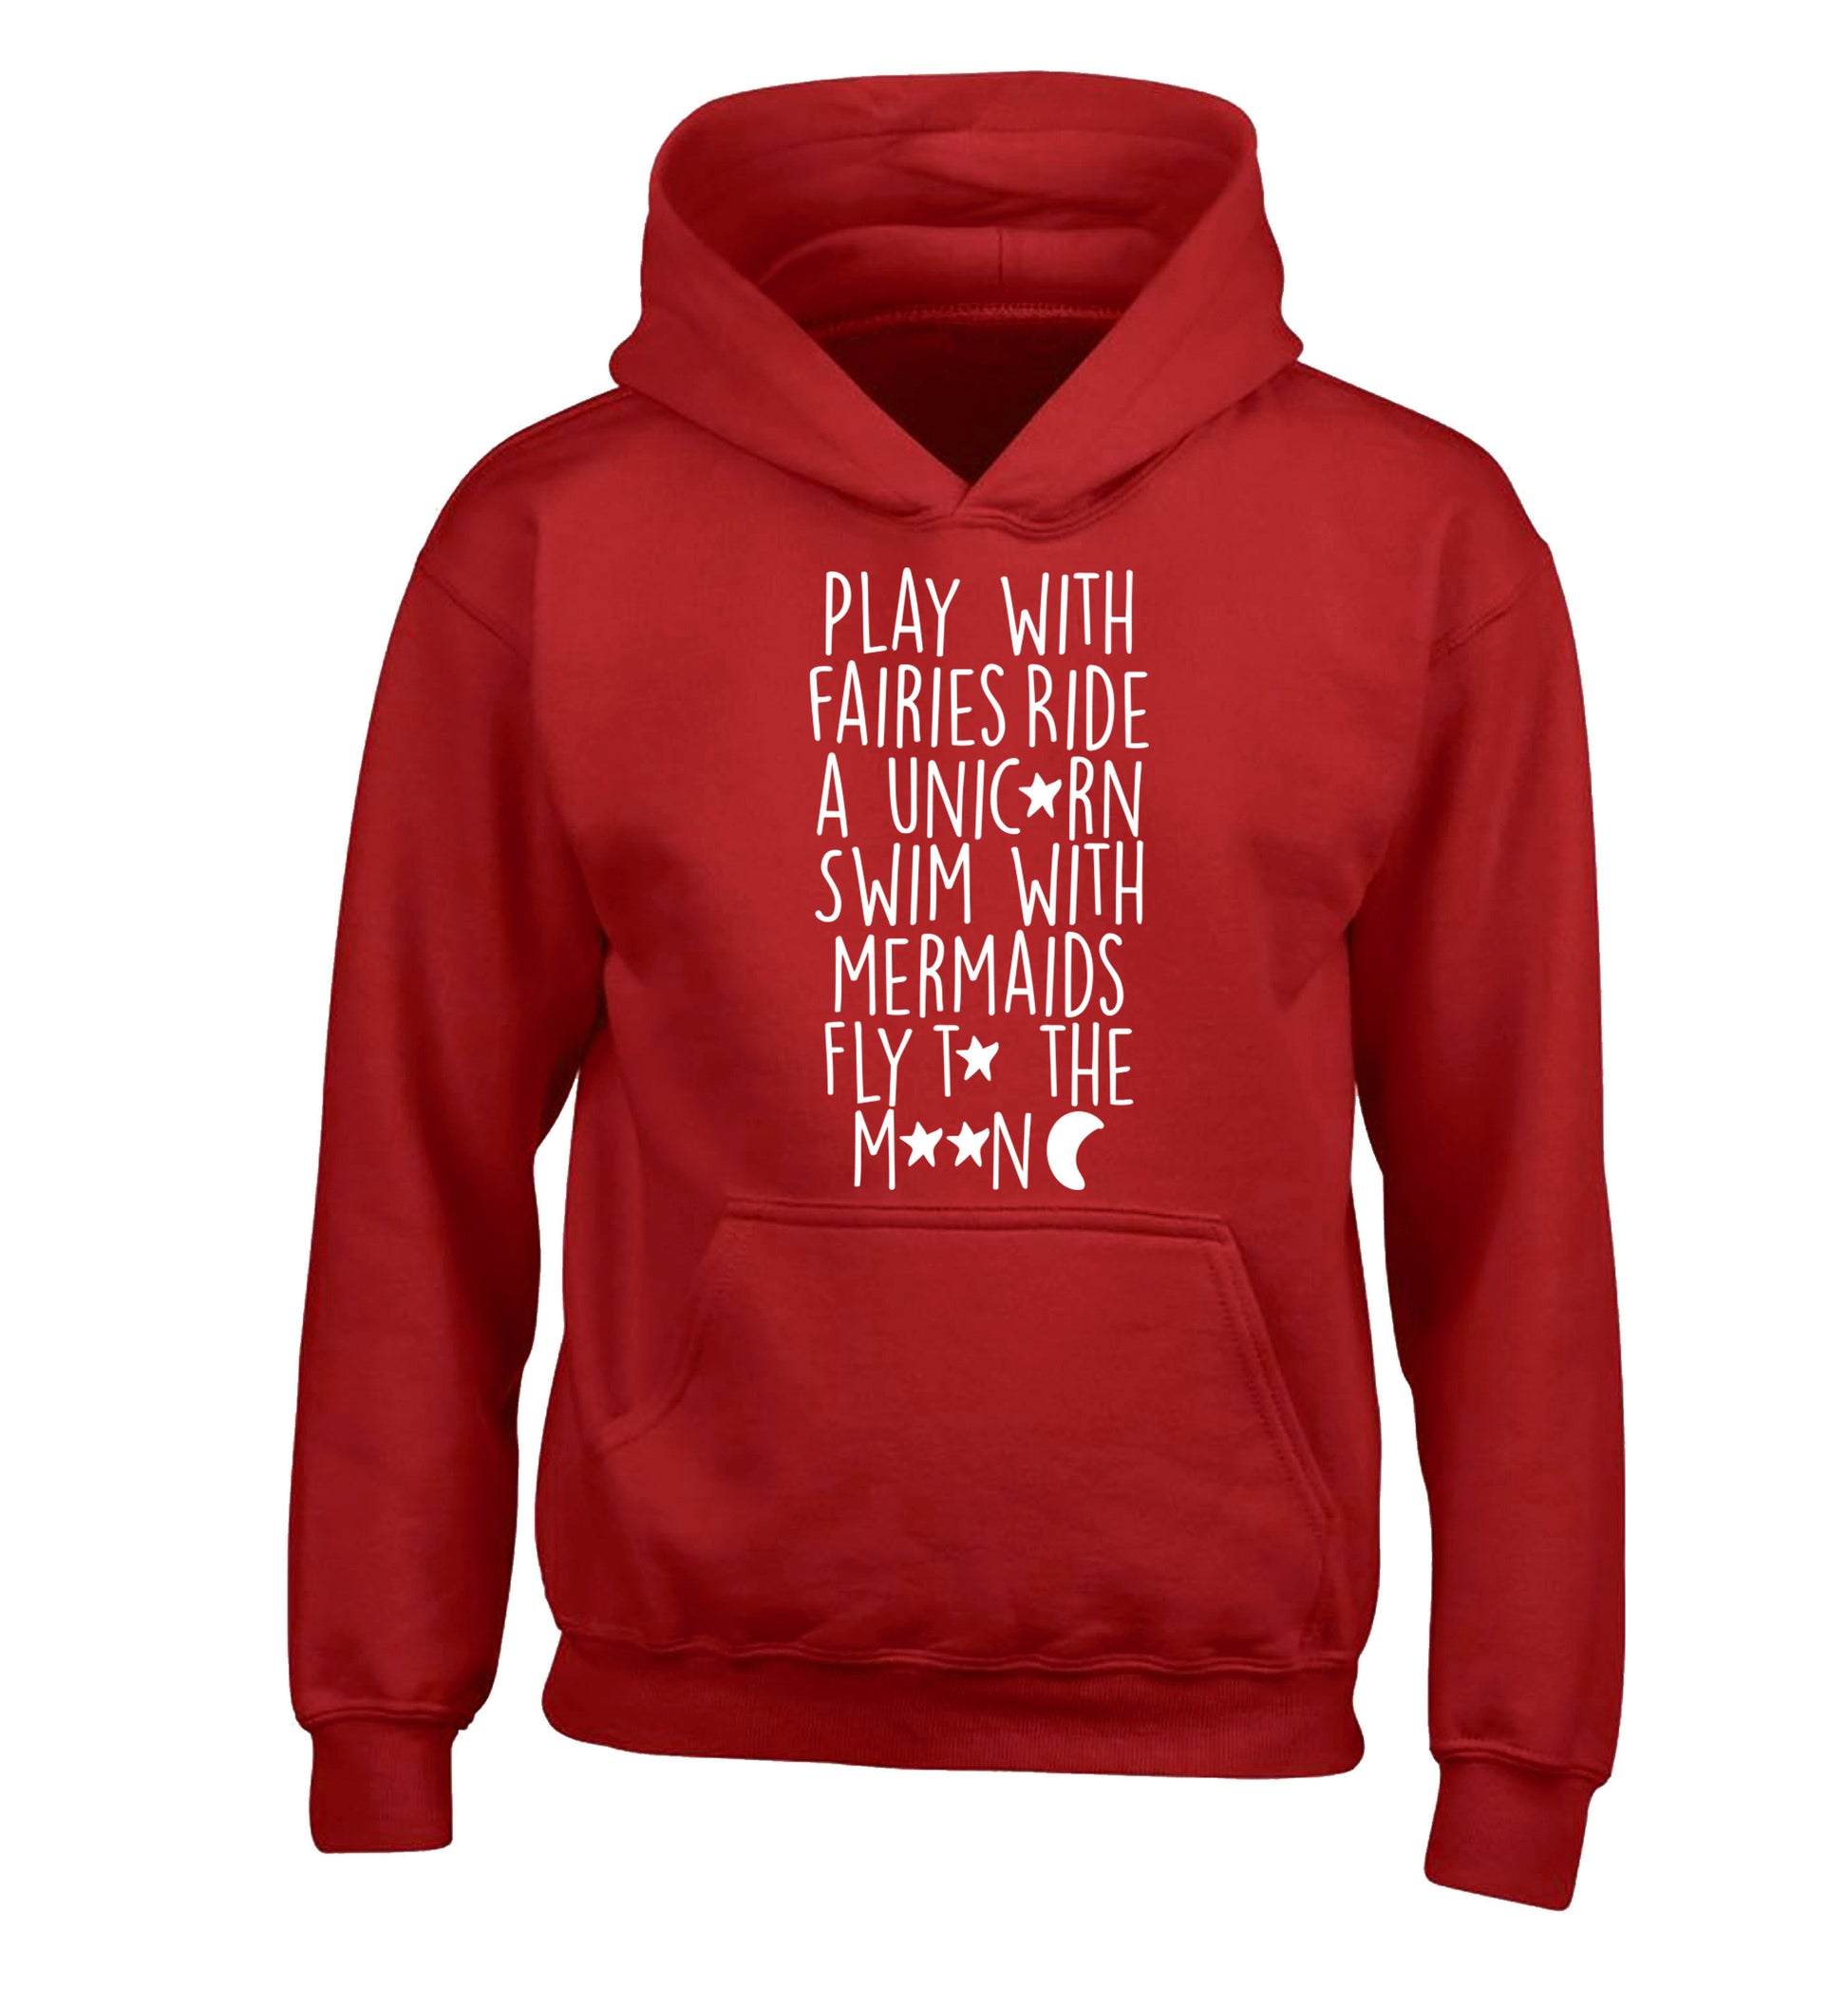 Play with fairies ride a unicorn swim with mermaids fly to the moon children's red hoodie 12-14 Years